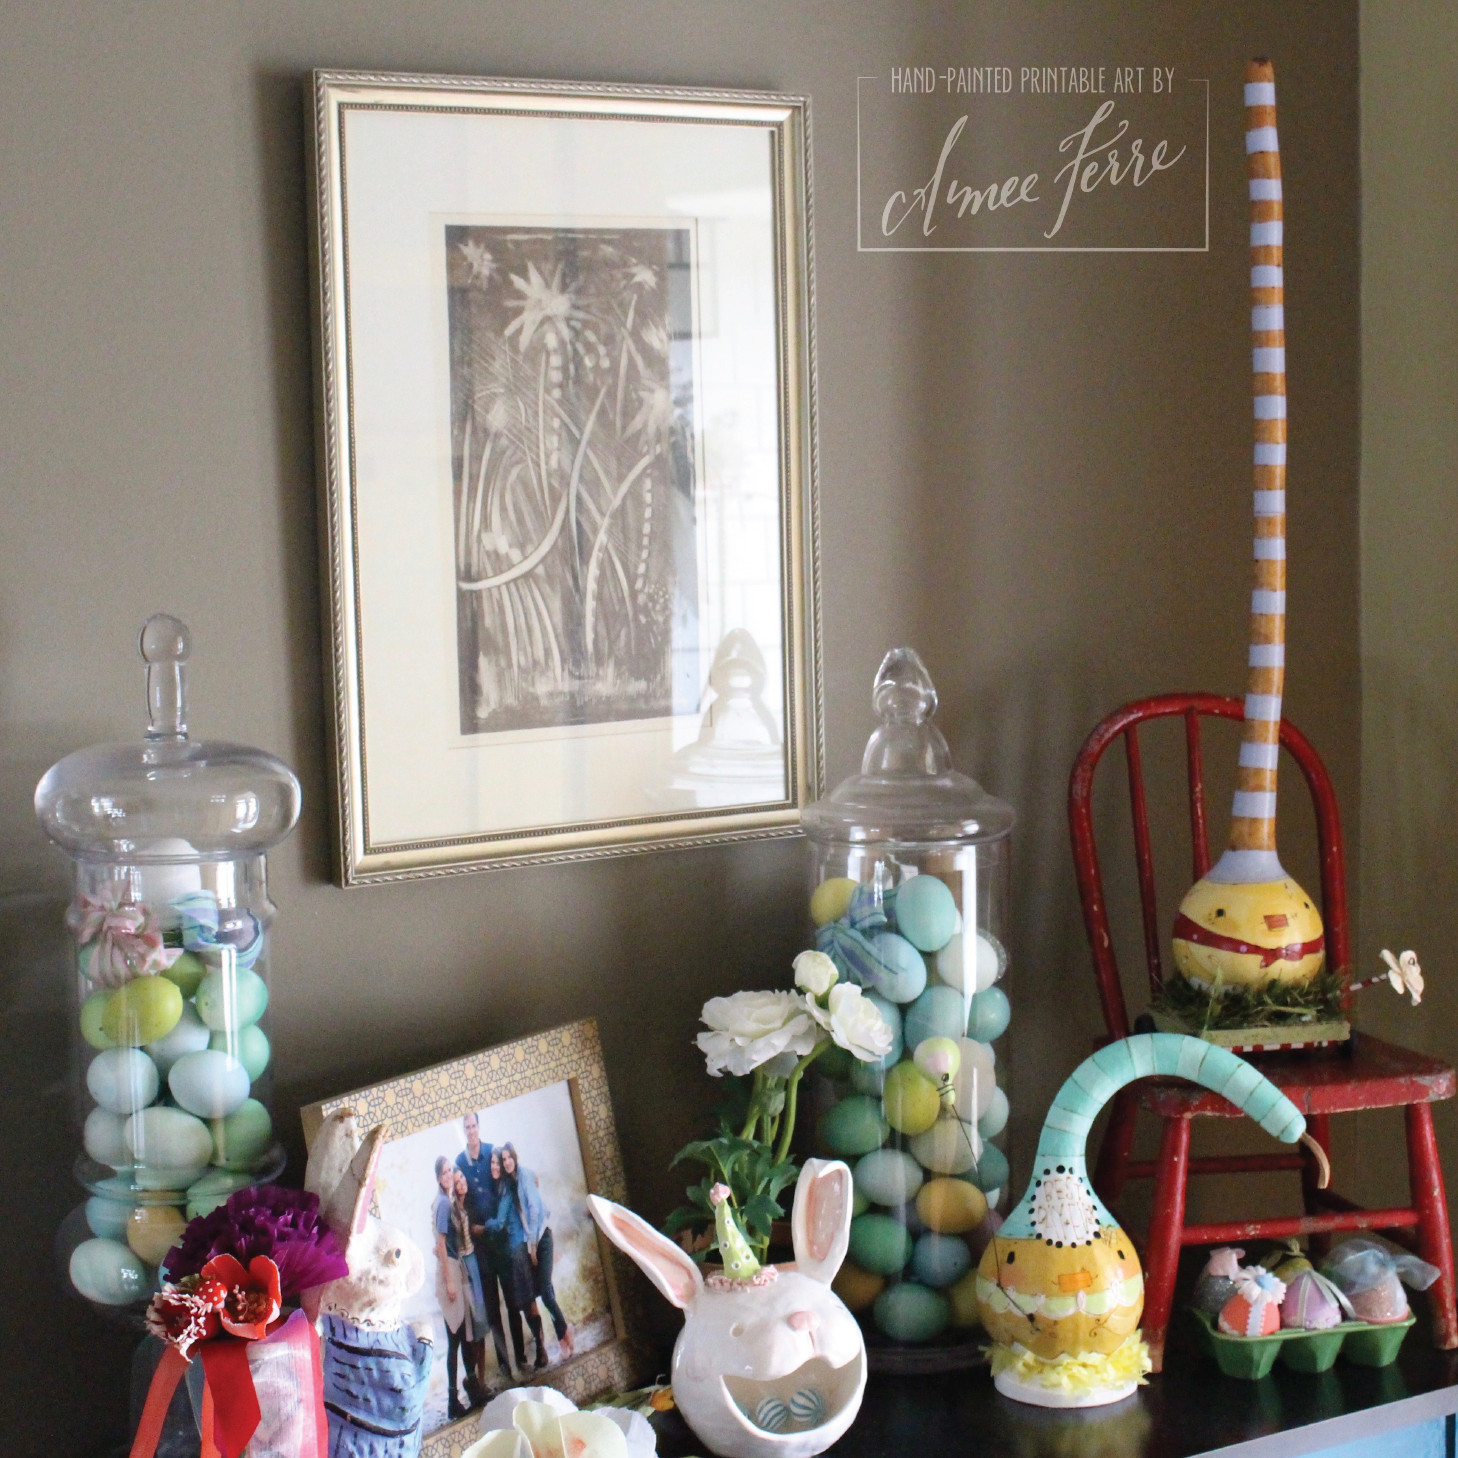 Easter Home Decor Best Of Easter Home Decor 2017 the Entry Table Aimee Ferre